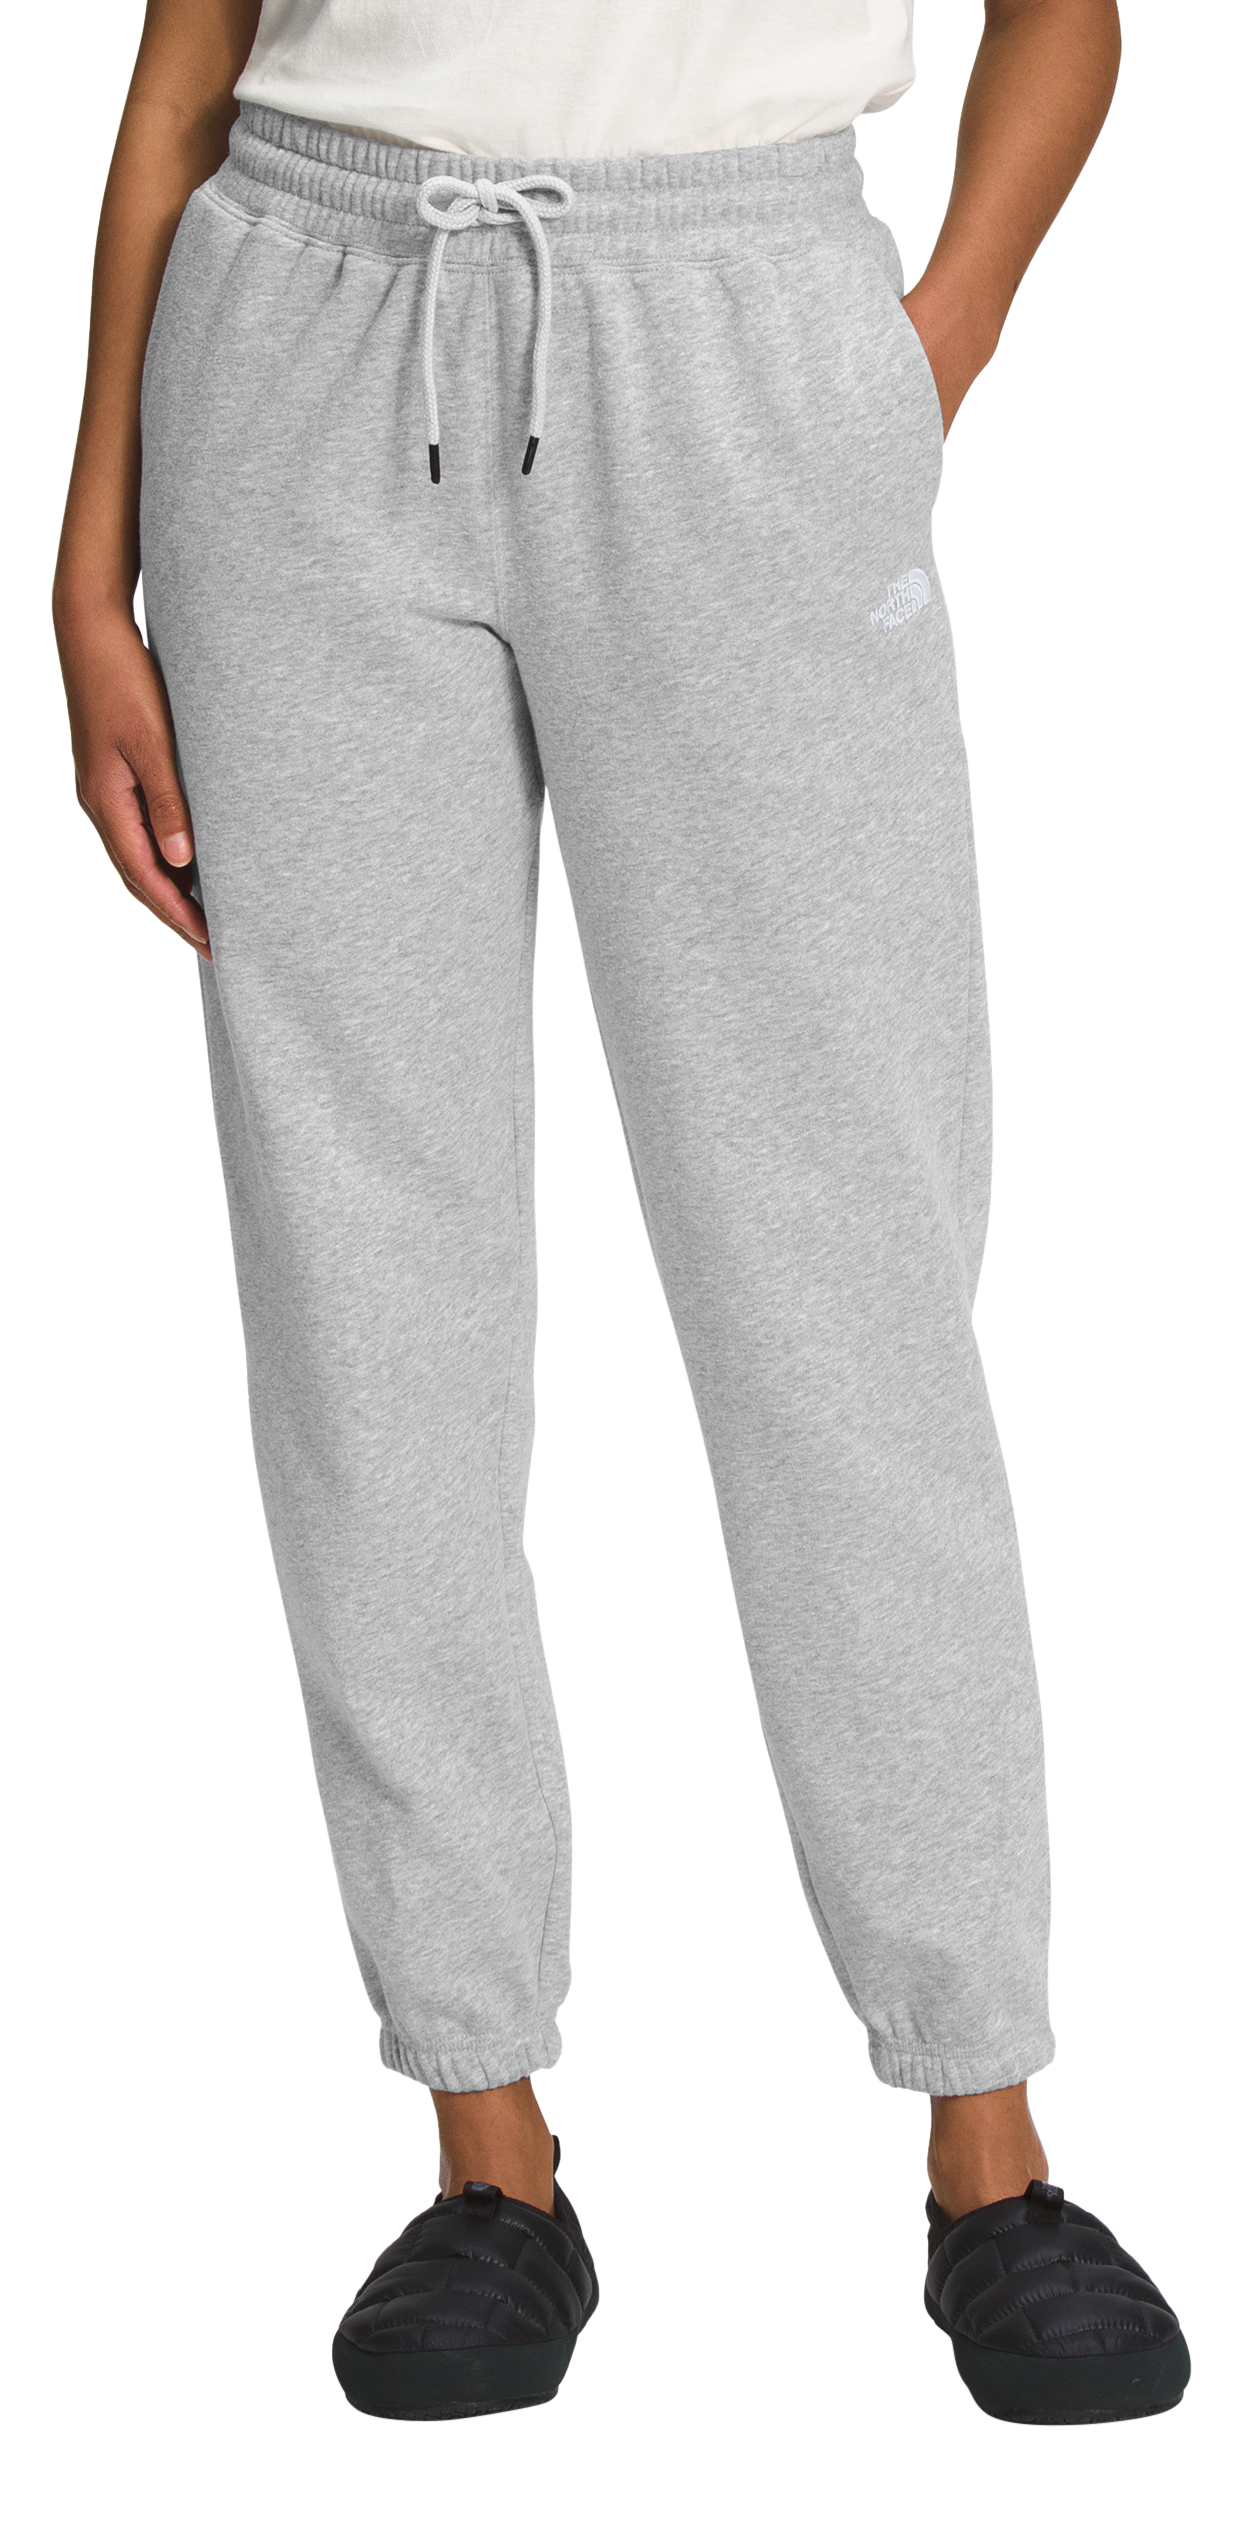 The North Face Half Dome Fleece Sweatpants for Ladies